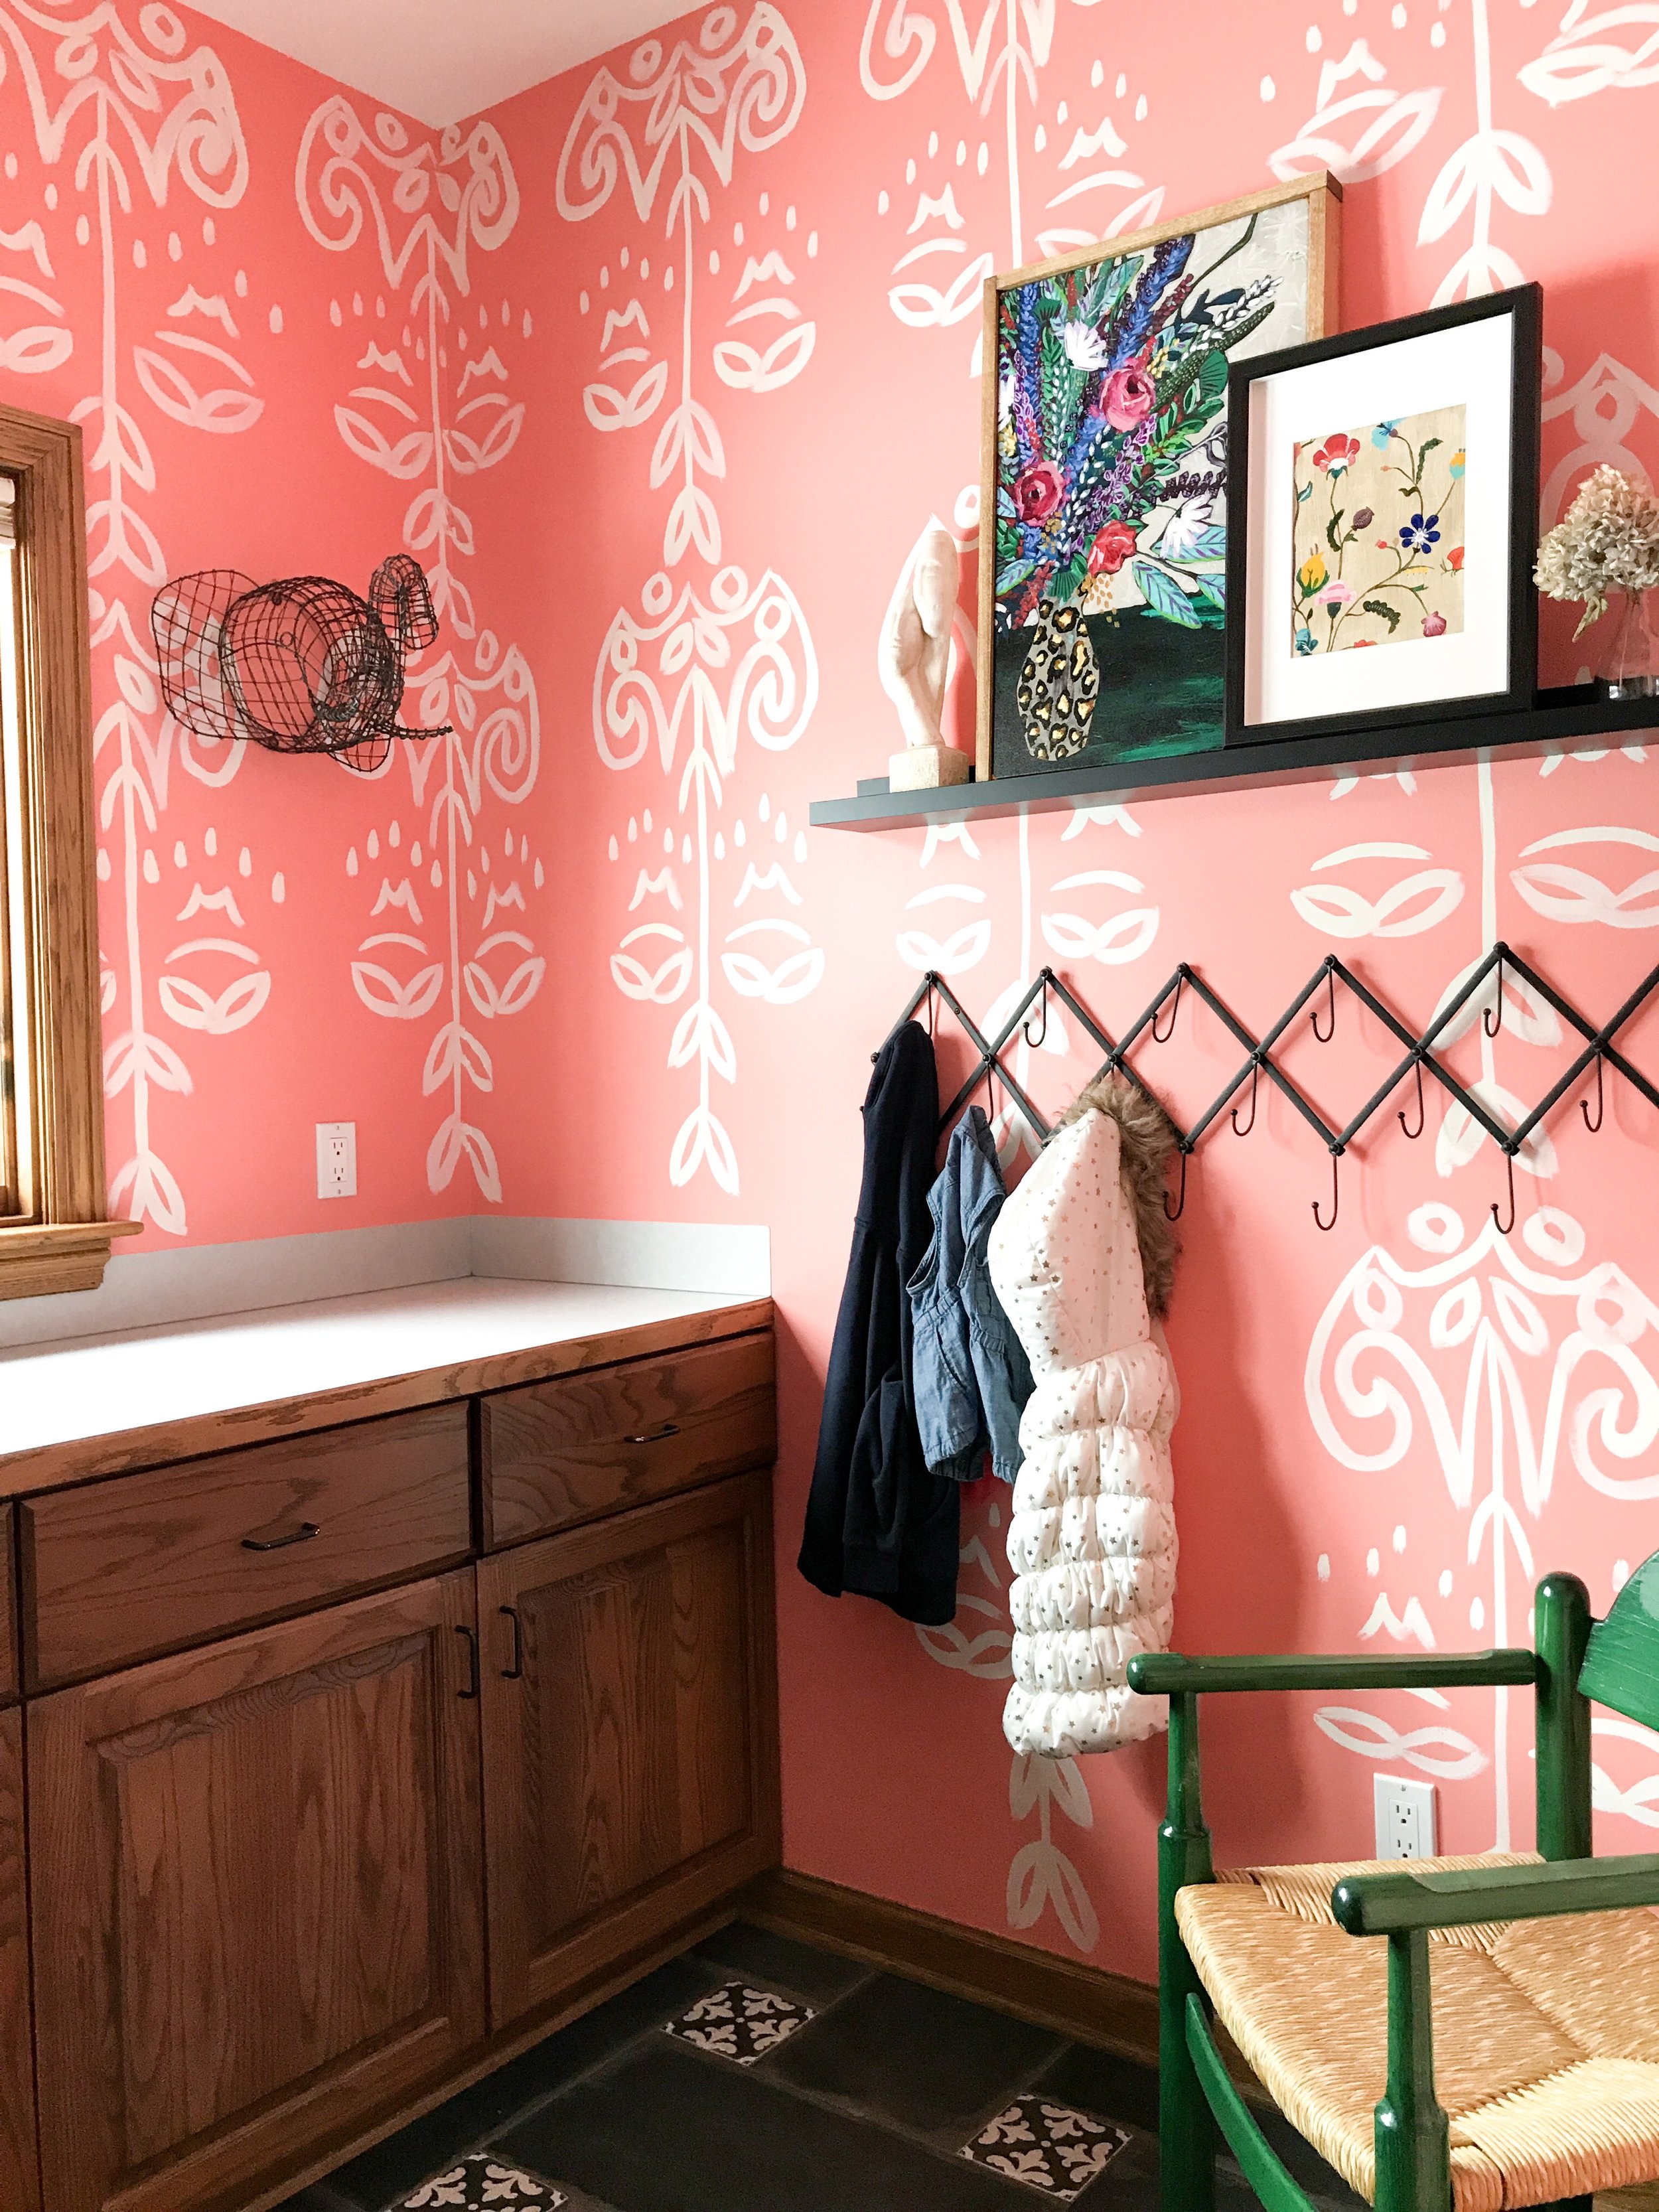 laundry room wallpaper — An artist's blog about art, wallpaper, decor  (especially how to design around oak wood), margaritas and everything  you've ever wanted to read. — COPPER CORNERS